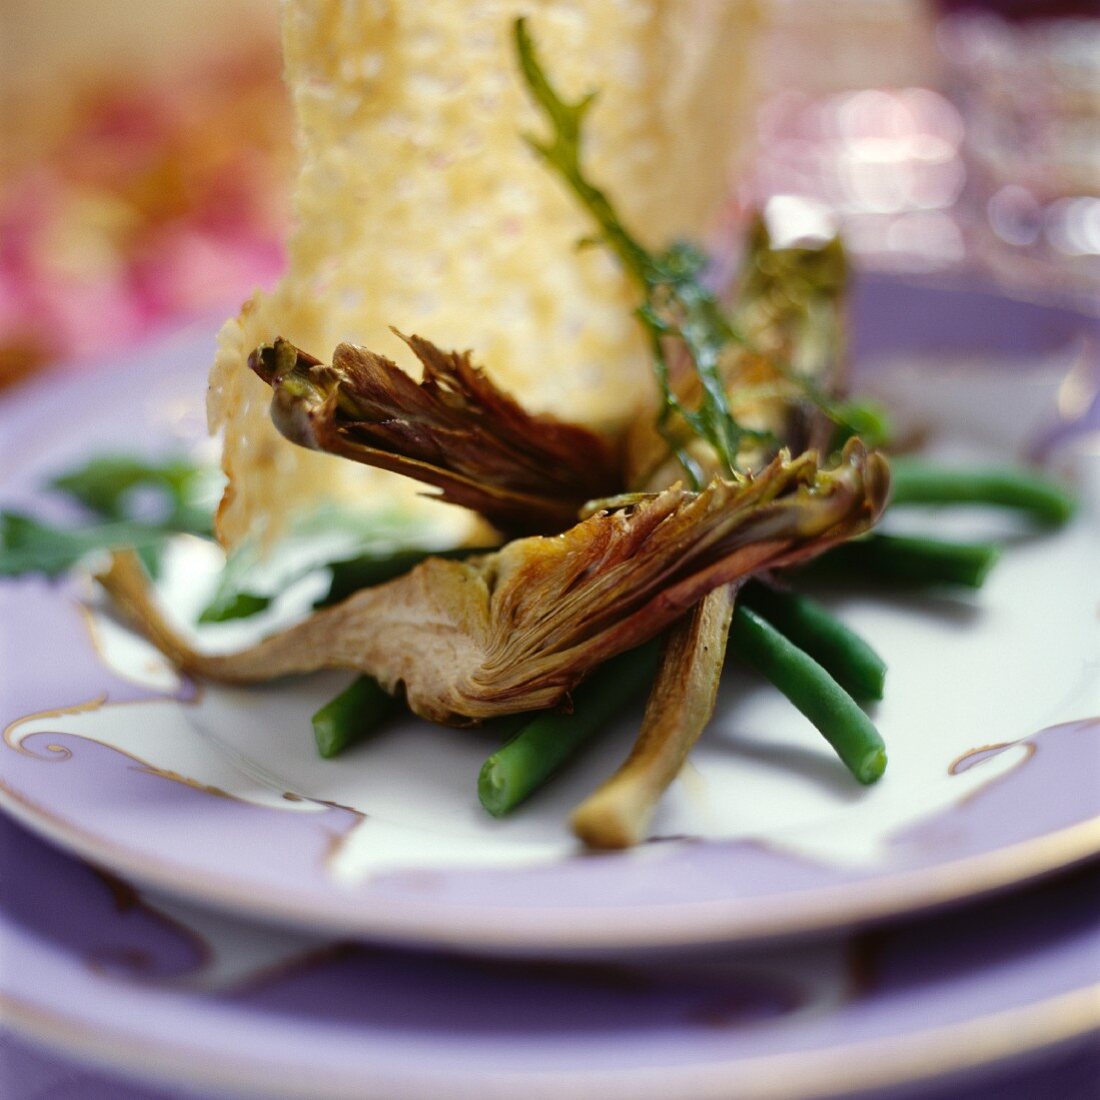 Grilled artichokes, green beans and Parmesan wafers